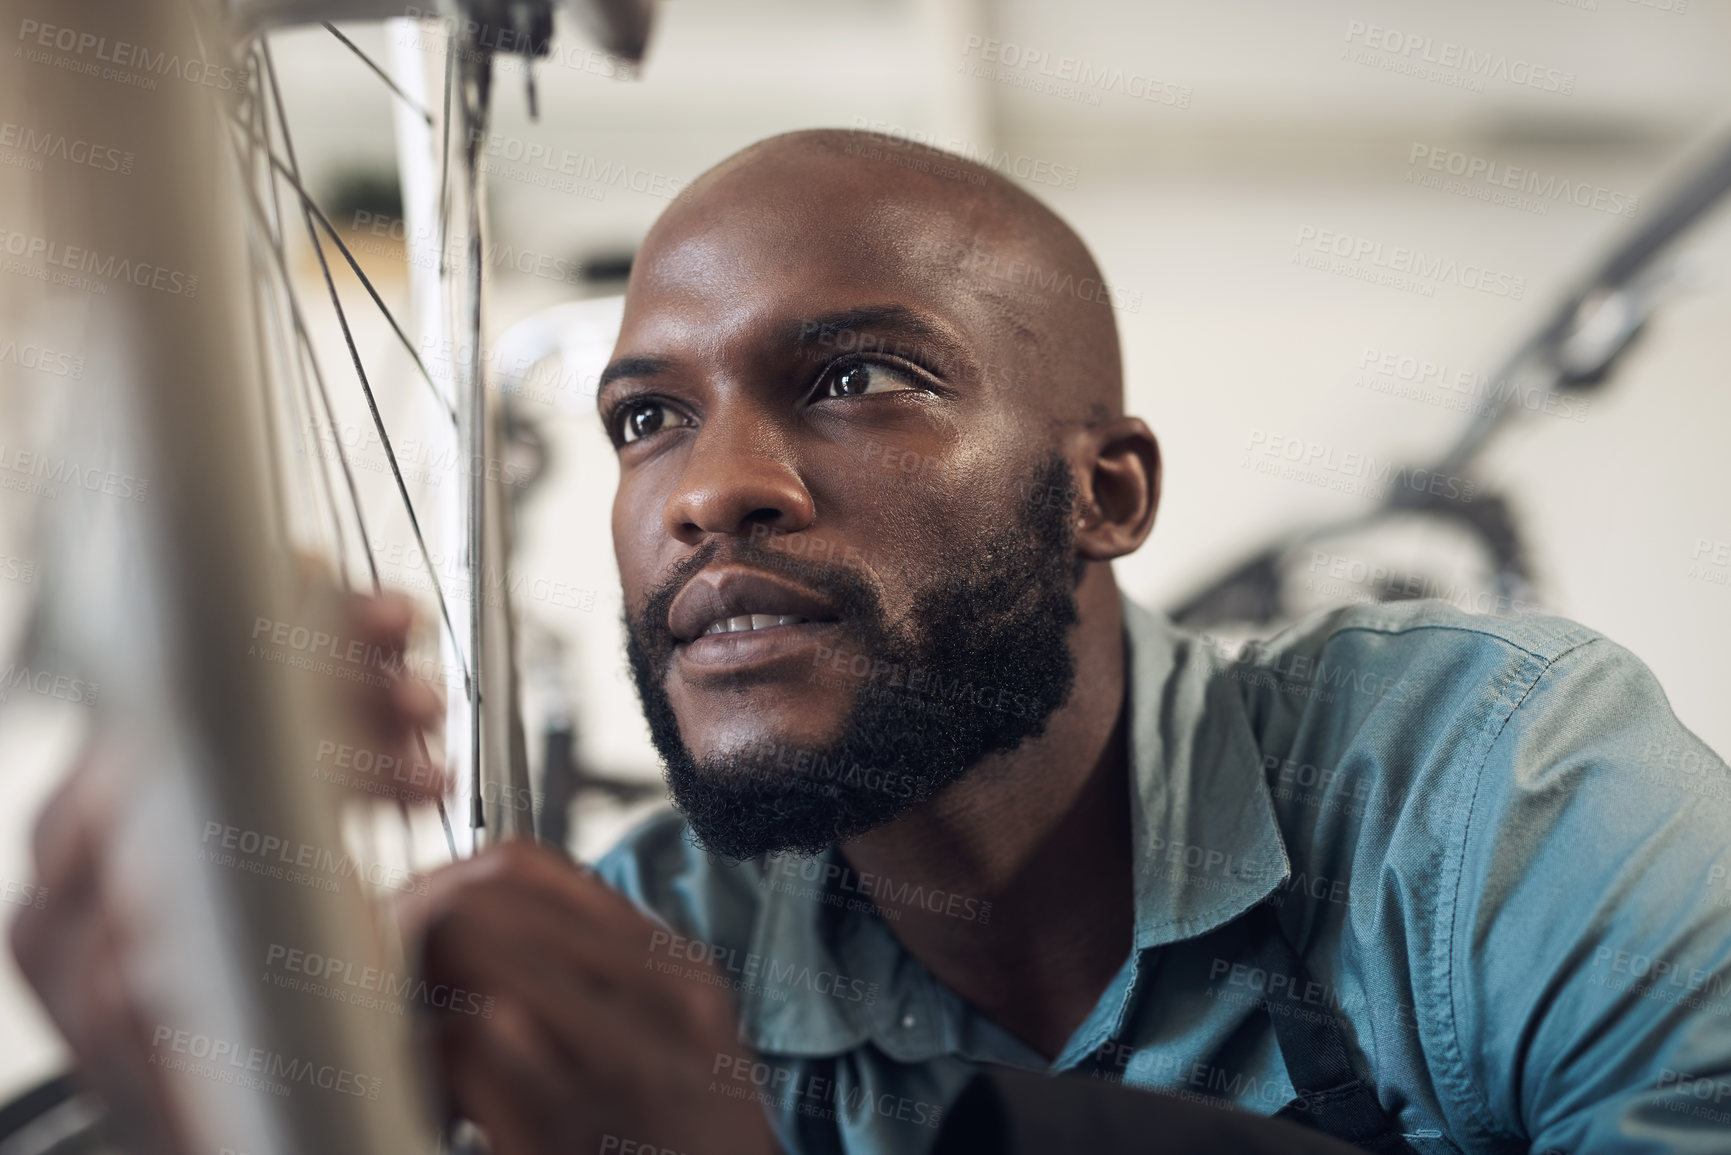 Buy stock photo Shot of a handsome young man crouching in his shop and repairing a bicycle wheel